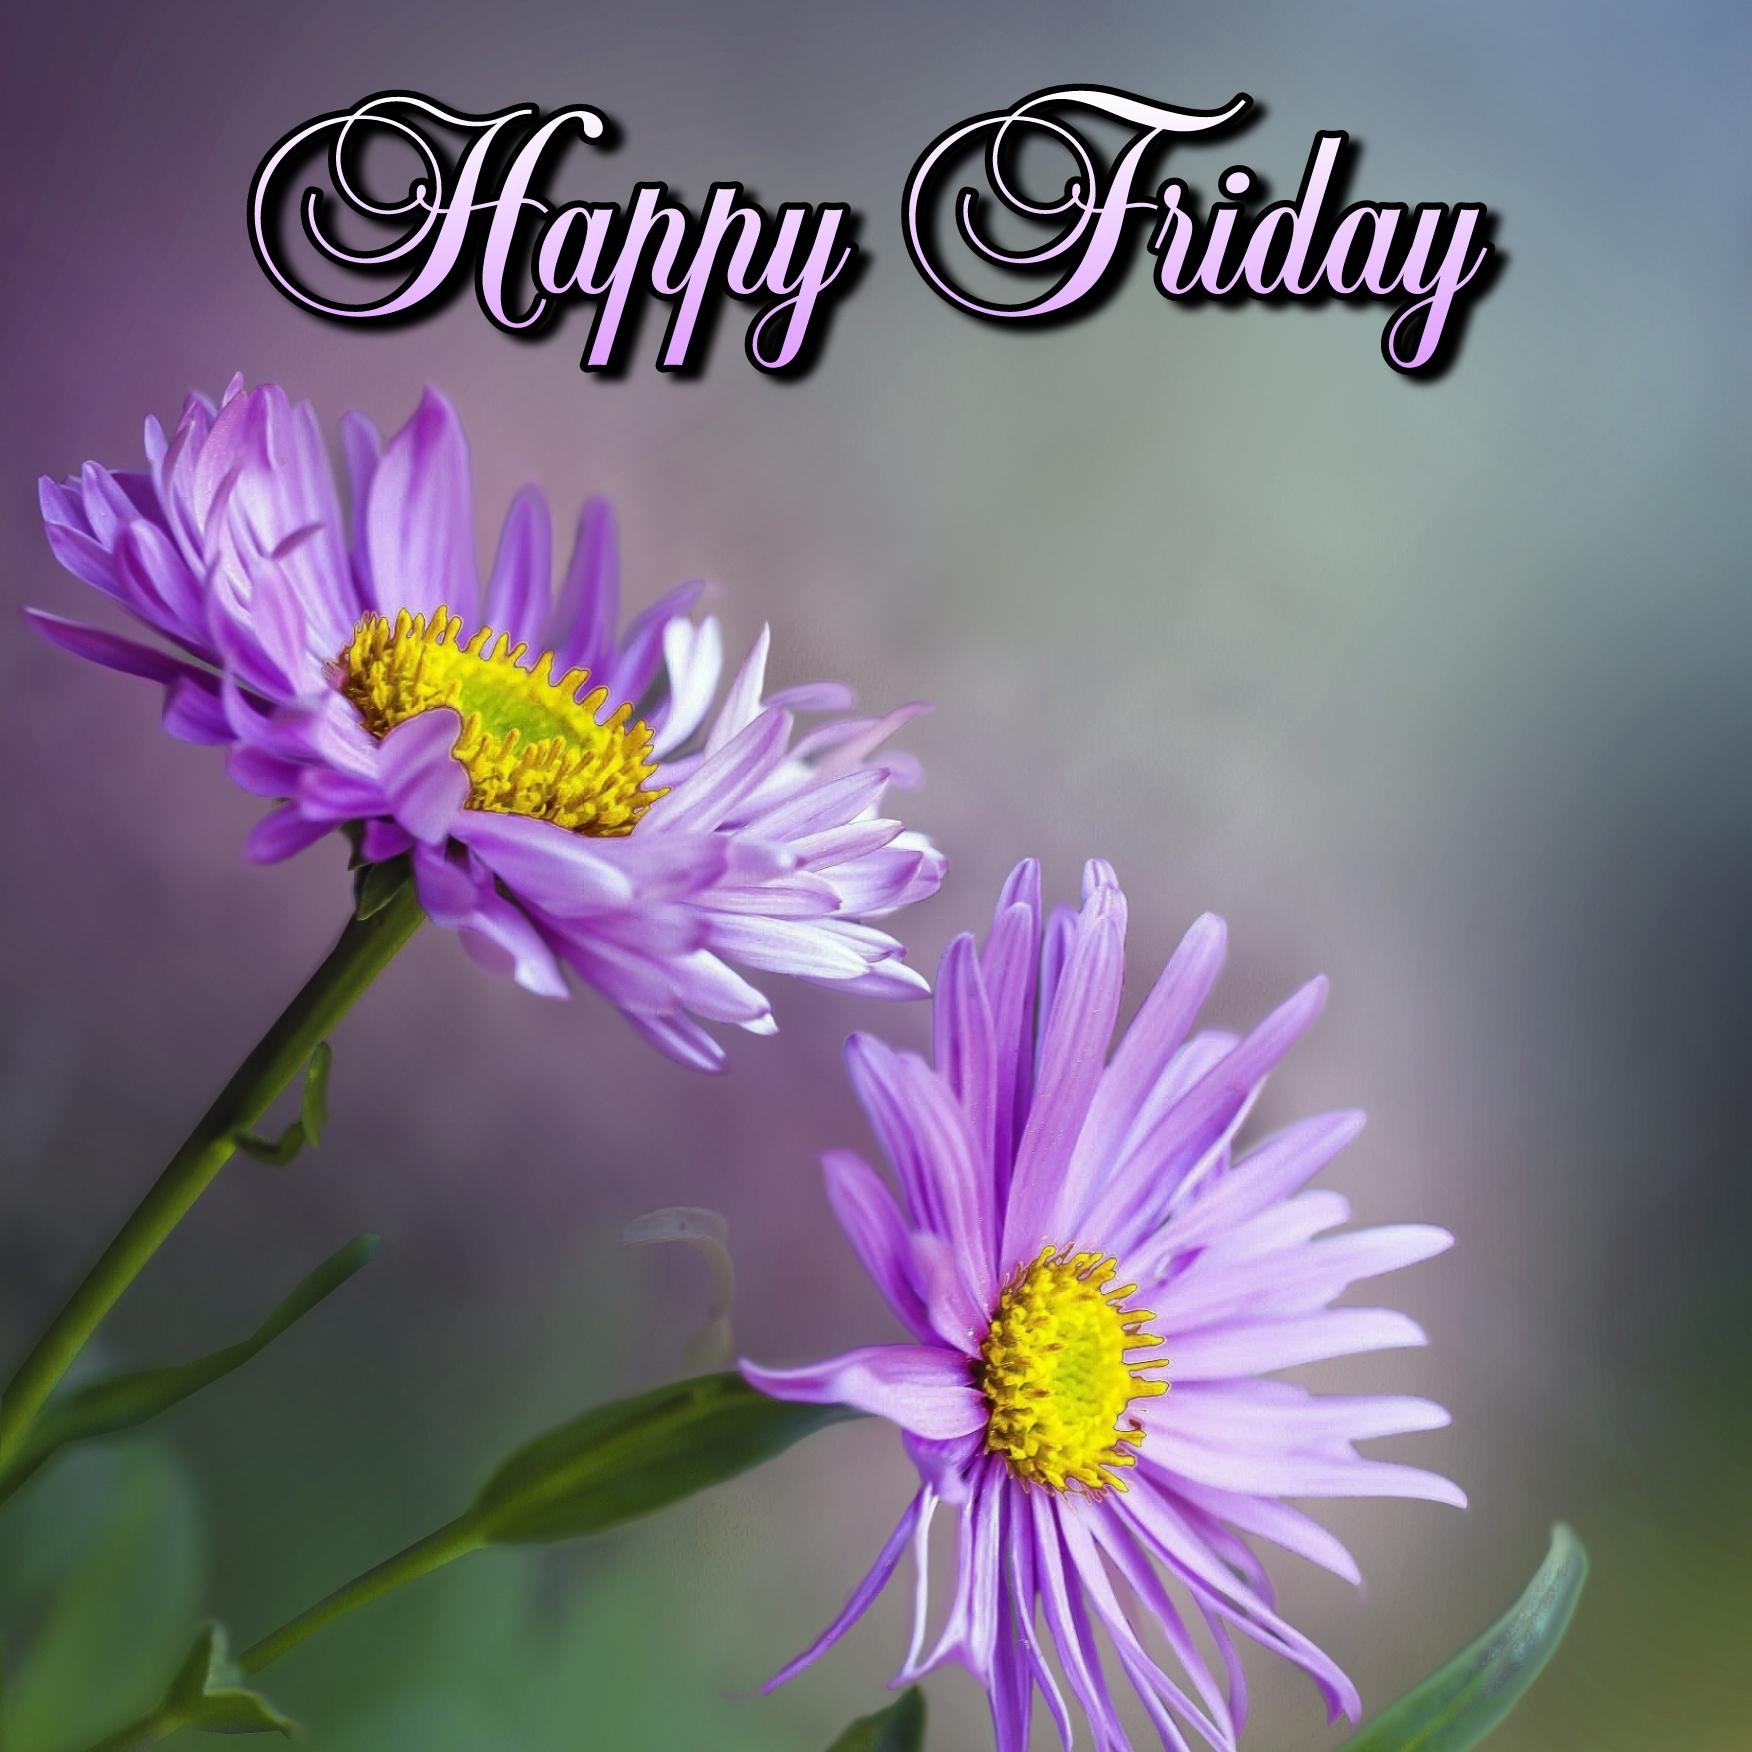 Beautiful Happy Friday Images